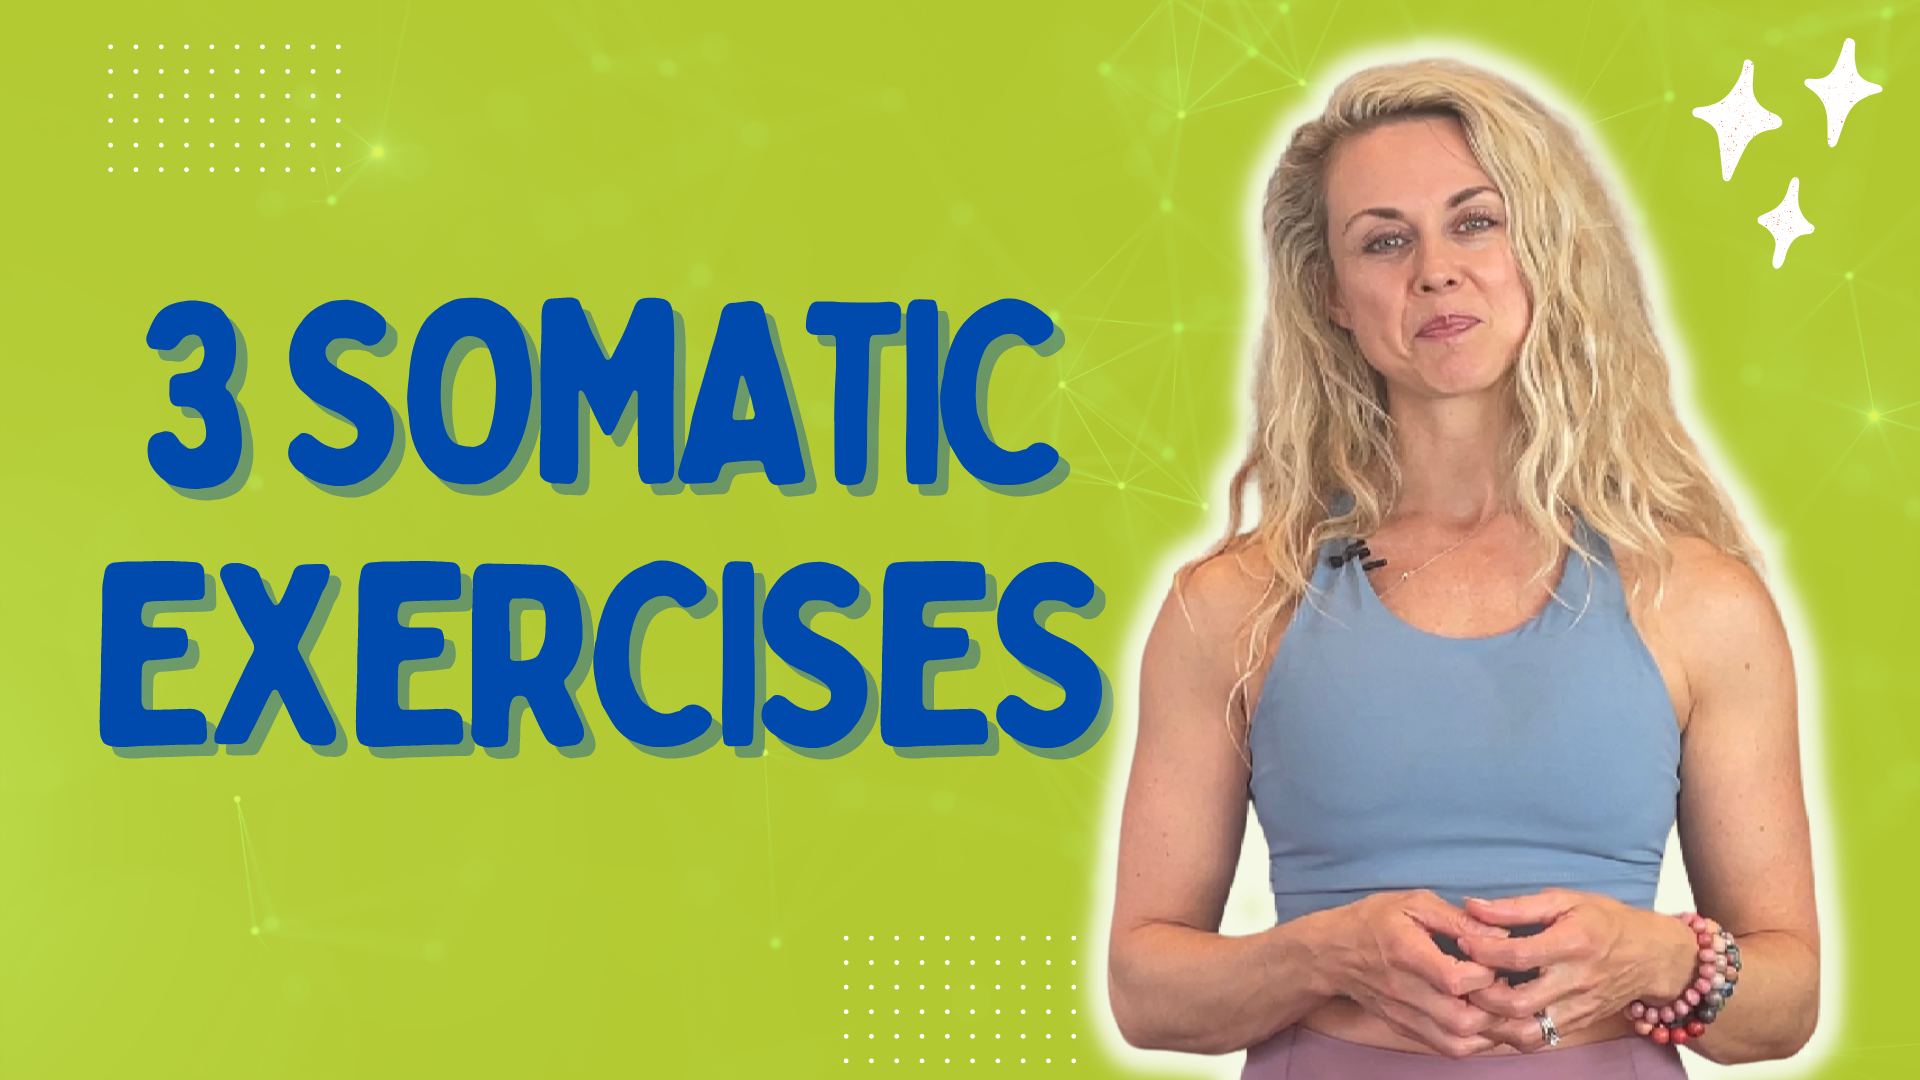 somatic exercises to get out of your head into your body